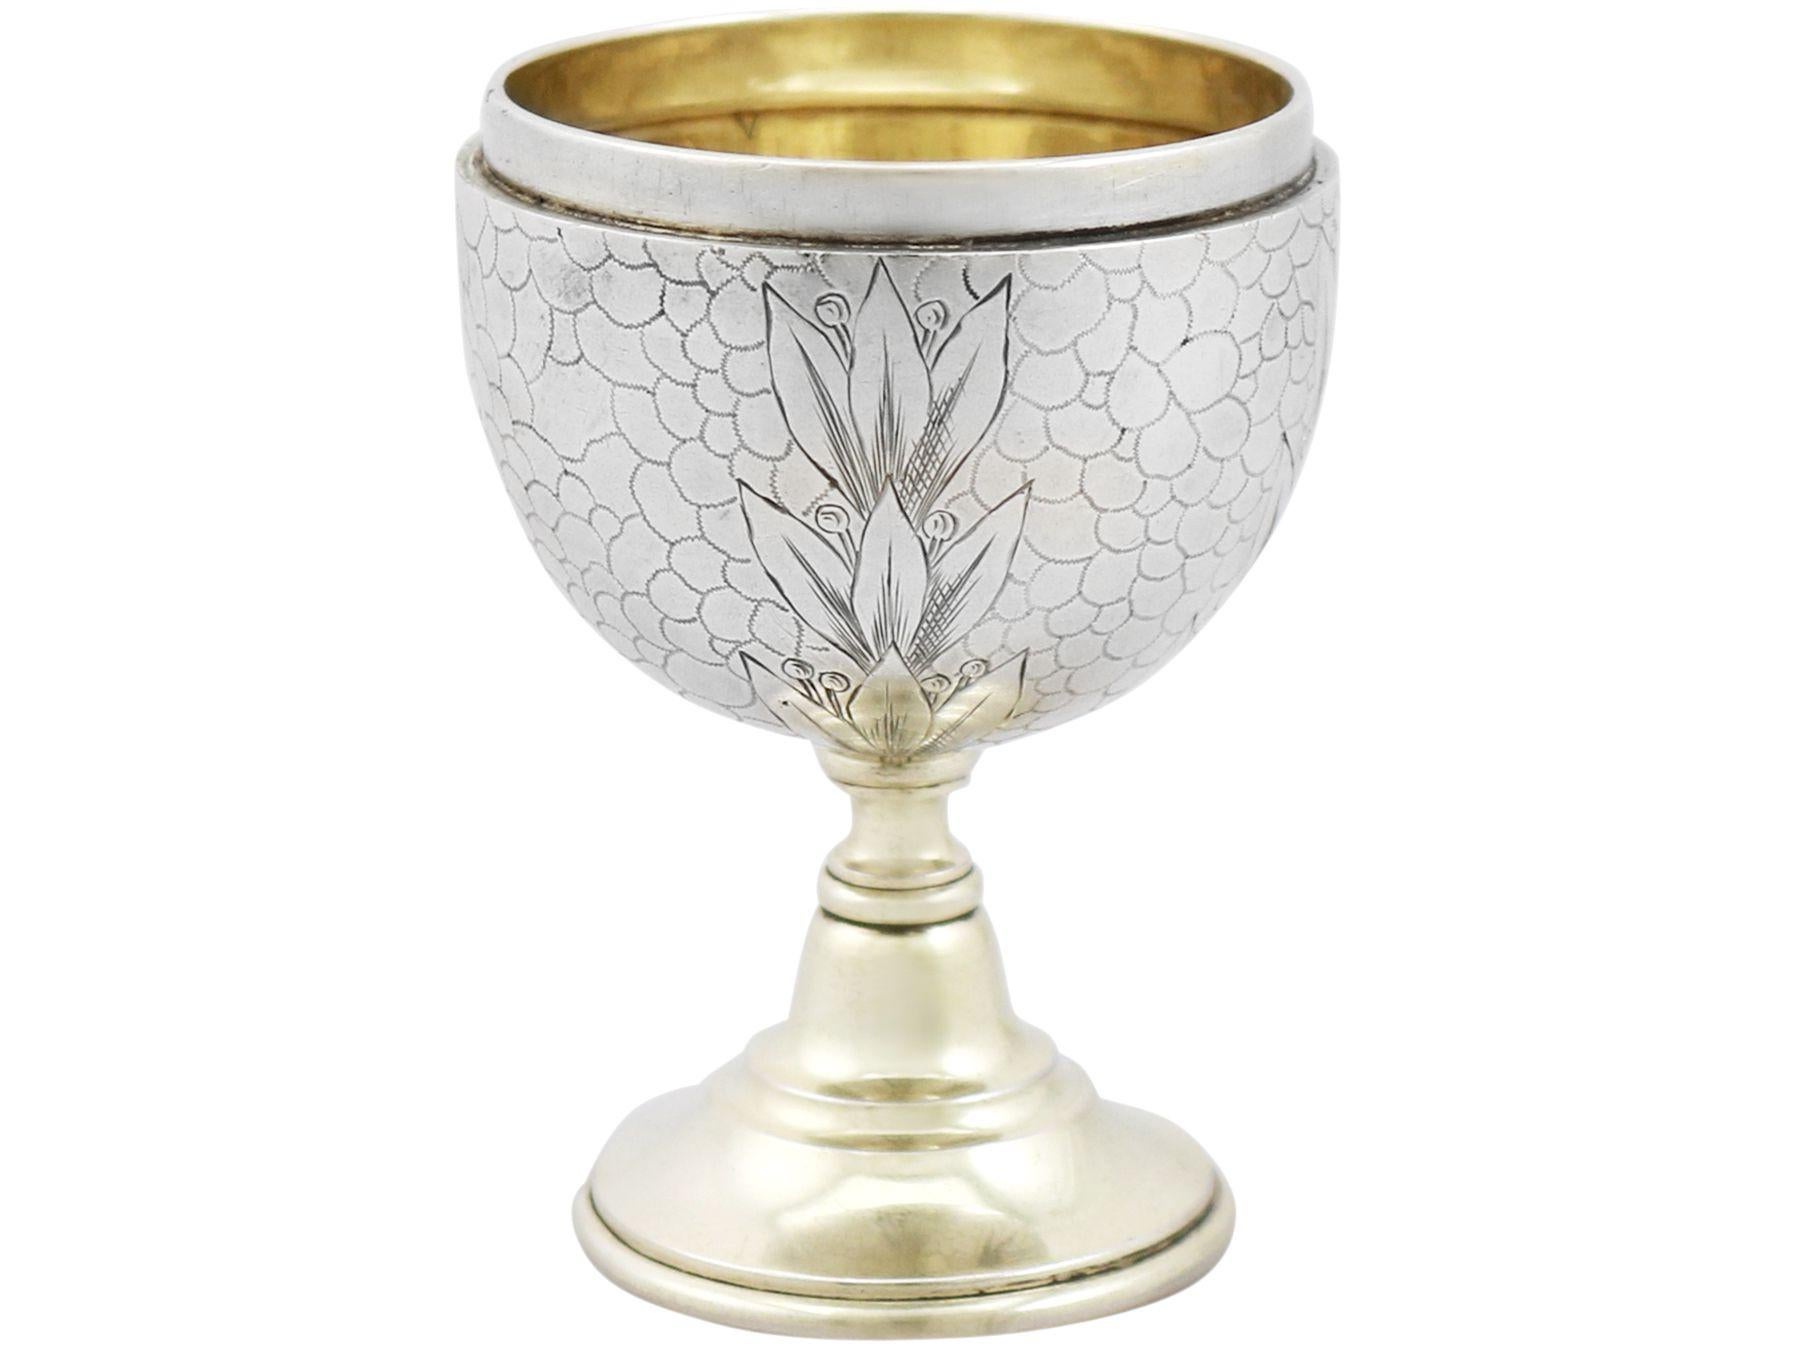 Antique Russian Silver Egg Cups In Excellent Condition For Sale In Jesmond, Newcastle Upon Tyne